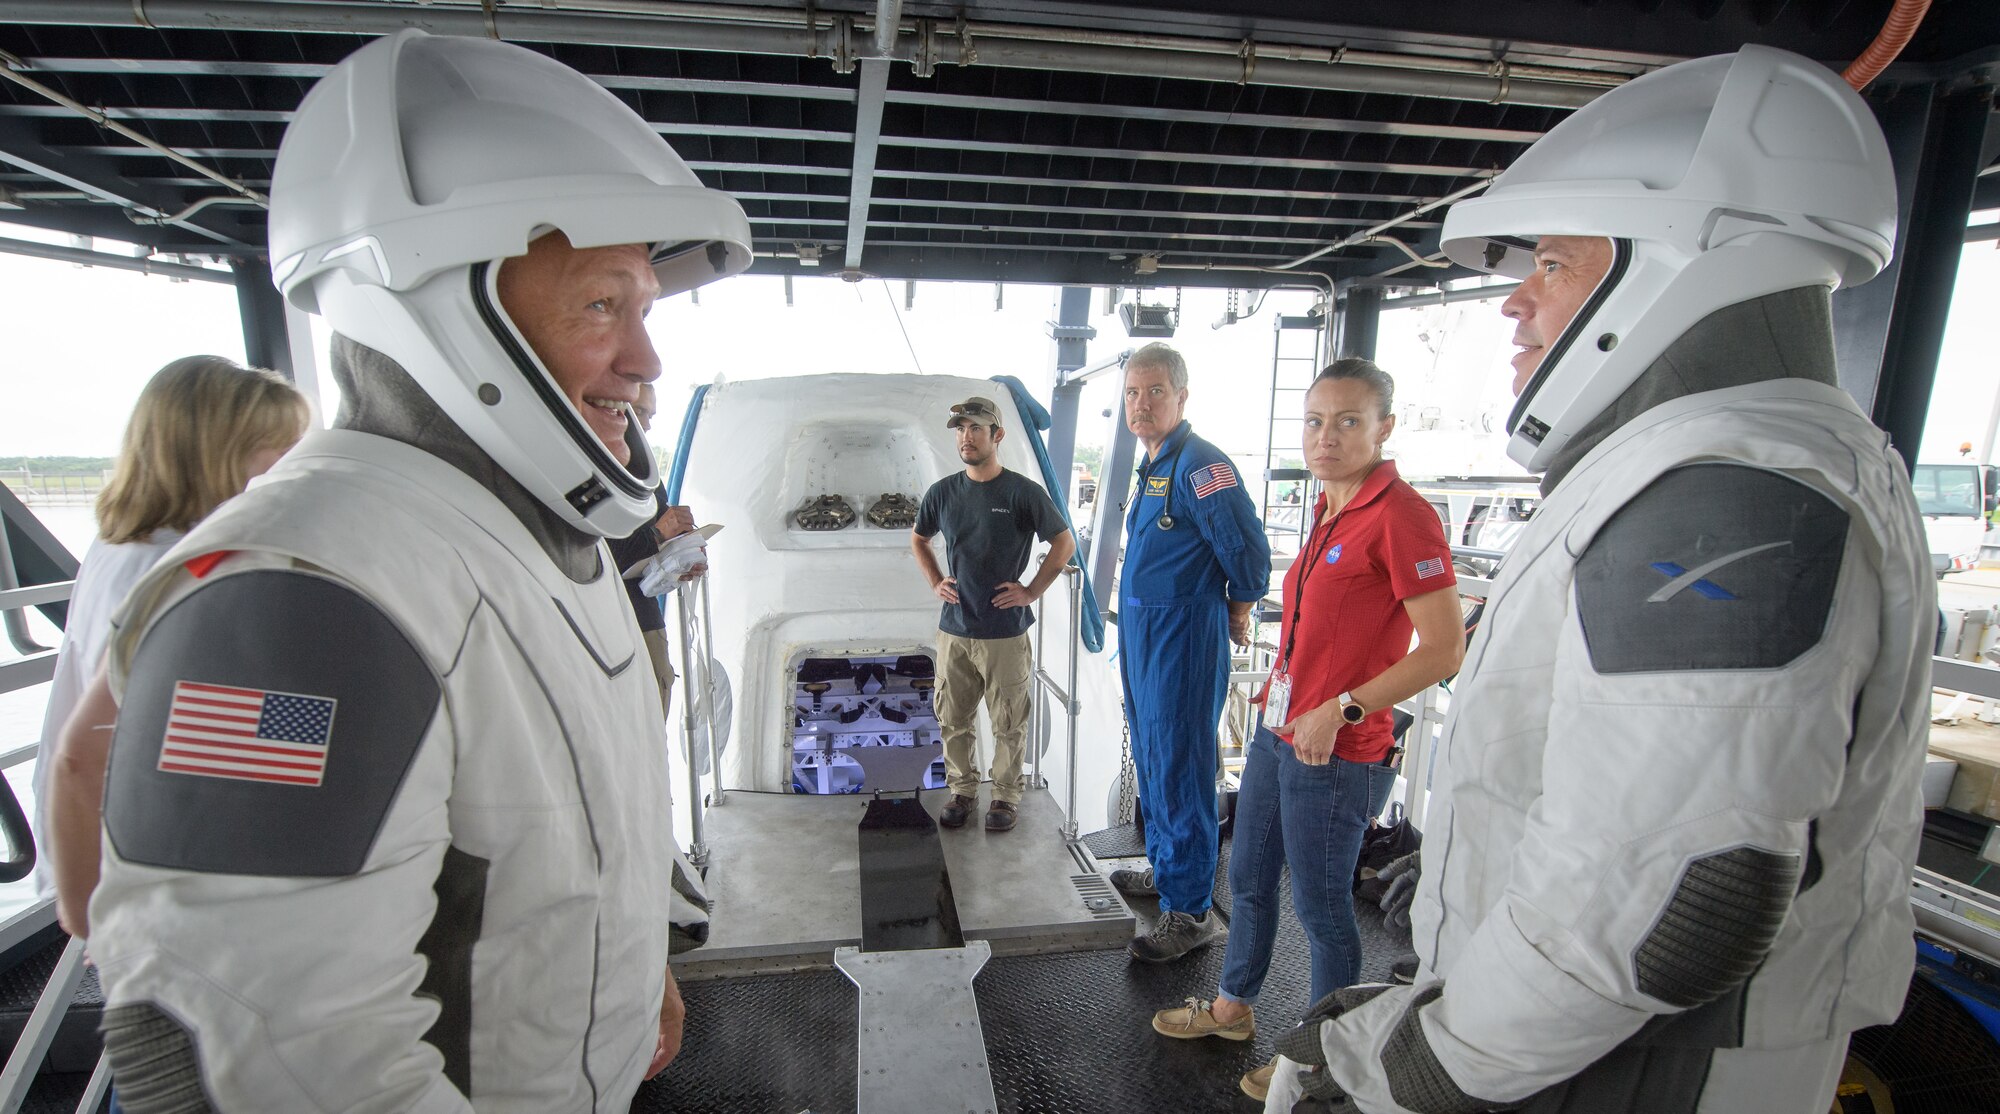 NASA astronauts Doug Hurley, left, and Bob Behnken work with teams from NASA and SpaceX to rehearse crew extraction from SpaceX’s Crew Dragon, which will be used to carry humans to the International Space Station, on August 13, 2019 at the Trident Basin in Cape Canaveral, Florida. Using the Go Searcher ship SpaceX uses to recover their spacecraft after splashdown and a mock-up of the Crew Dragon, the teams worked through the steps necessary to get NASA astronauts Doug Hurley and Bob Behnken out of the Dragon and back to dry land. Hurley and Behnken will fly to the space station aboard the Crew Dragon for the SpaceX Demo-2 mission. Photo Credit: (NASA/Bill Ingalls)